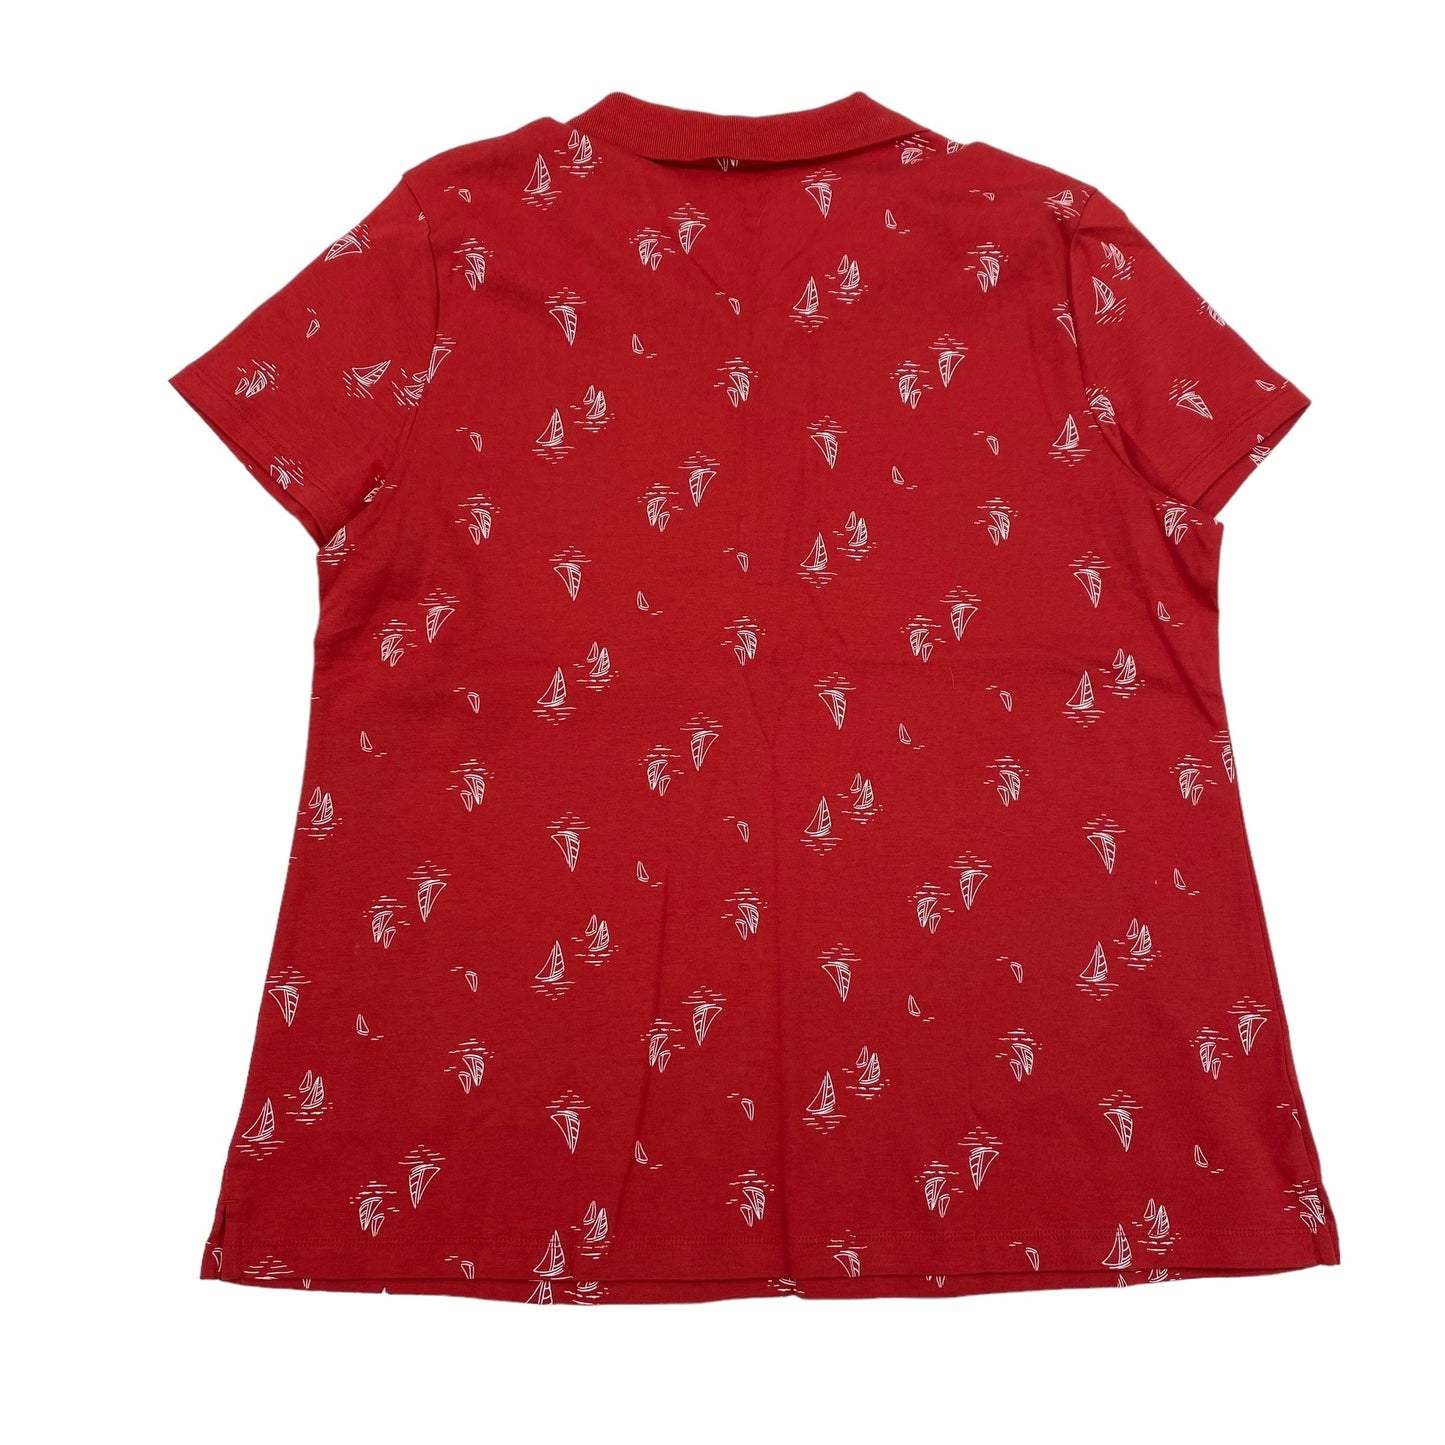 RED TOP SS by CROFT AND BARROW Size:XL